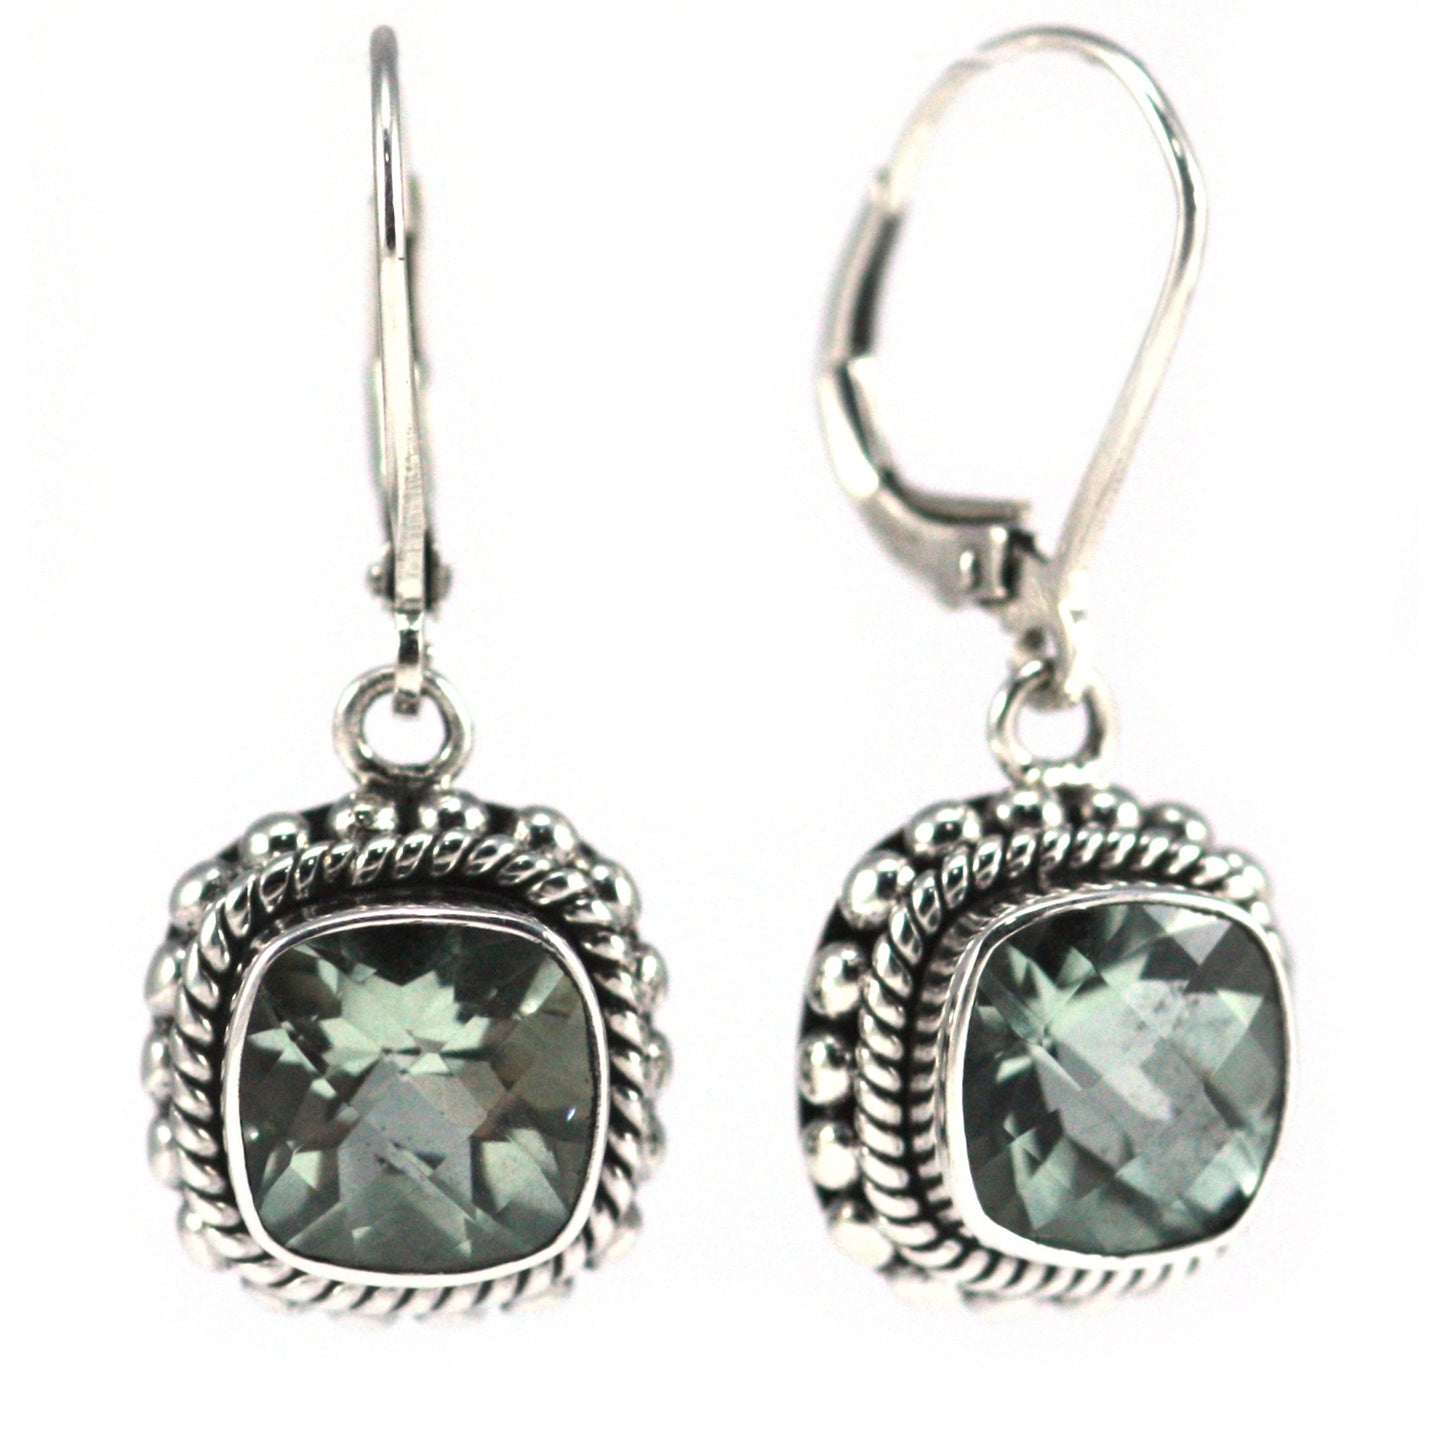 Silver earrings with green amethyst square gemstones.